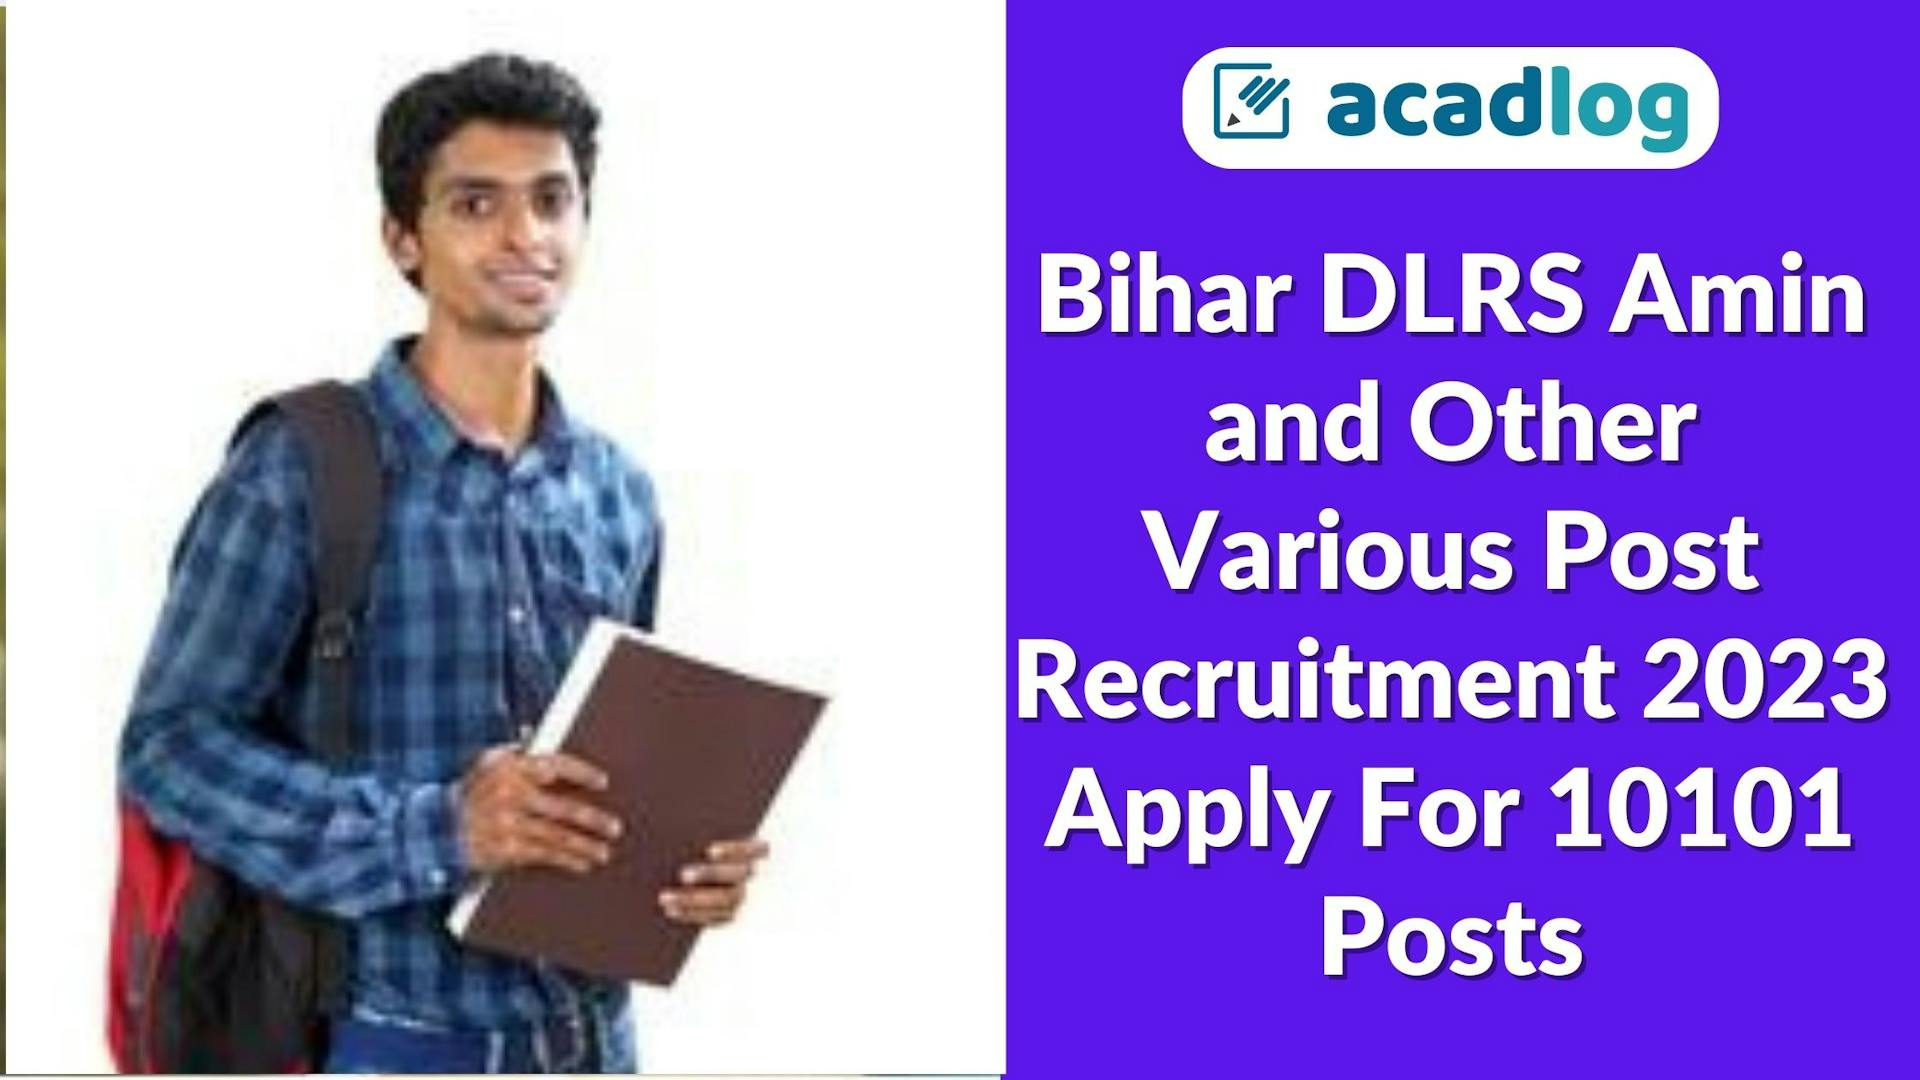 BCECE Bihar Directorate of Land Records & Survey DLRS AMIN, Kanoongo, Clerk & ASO Recruitment 2023 Apply Online for 10101 Post